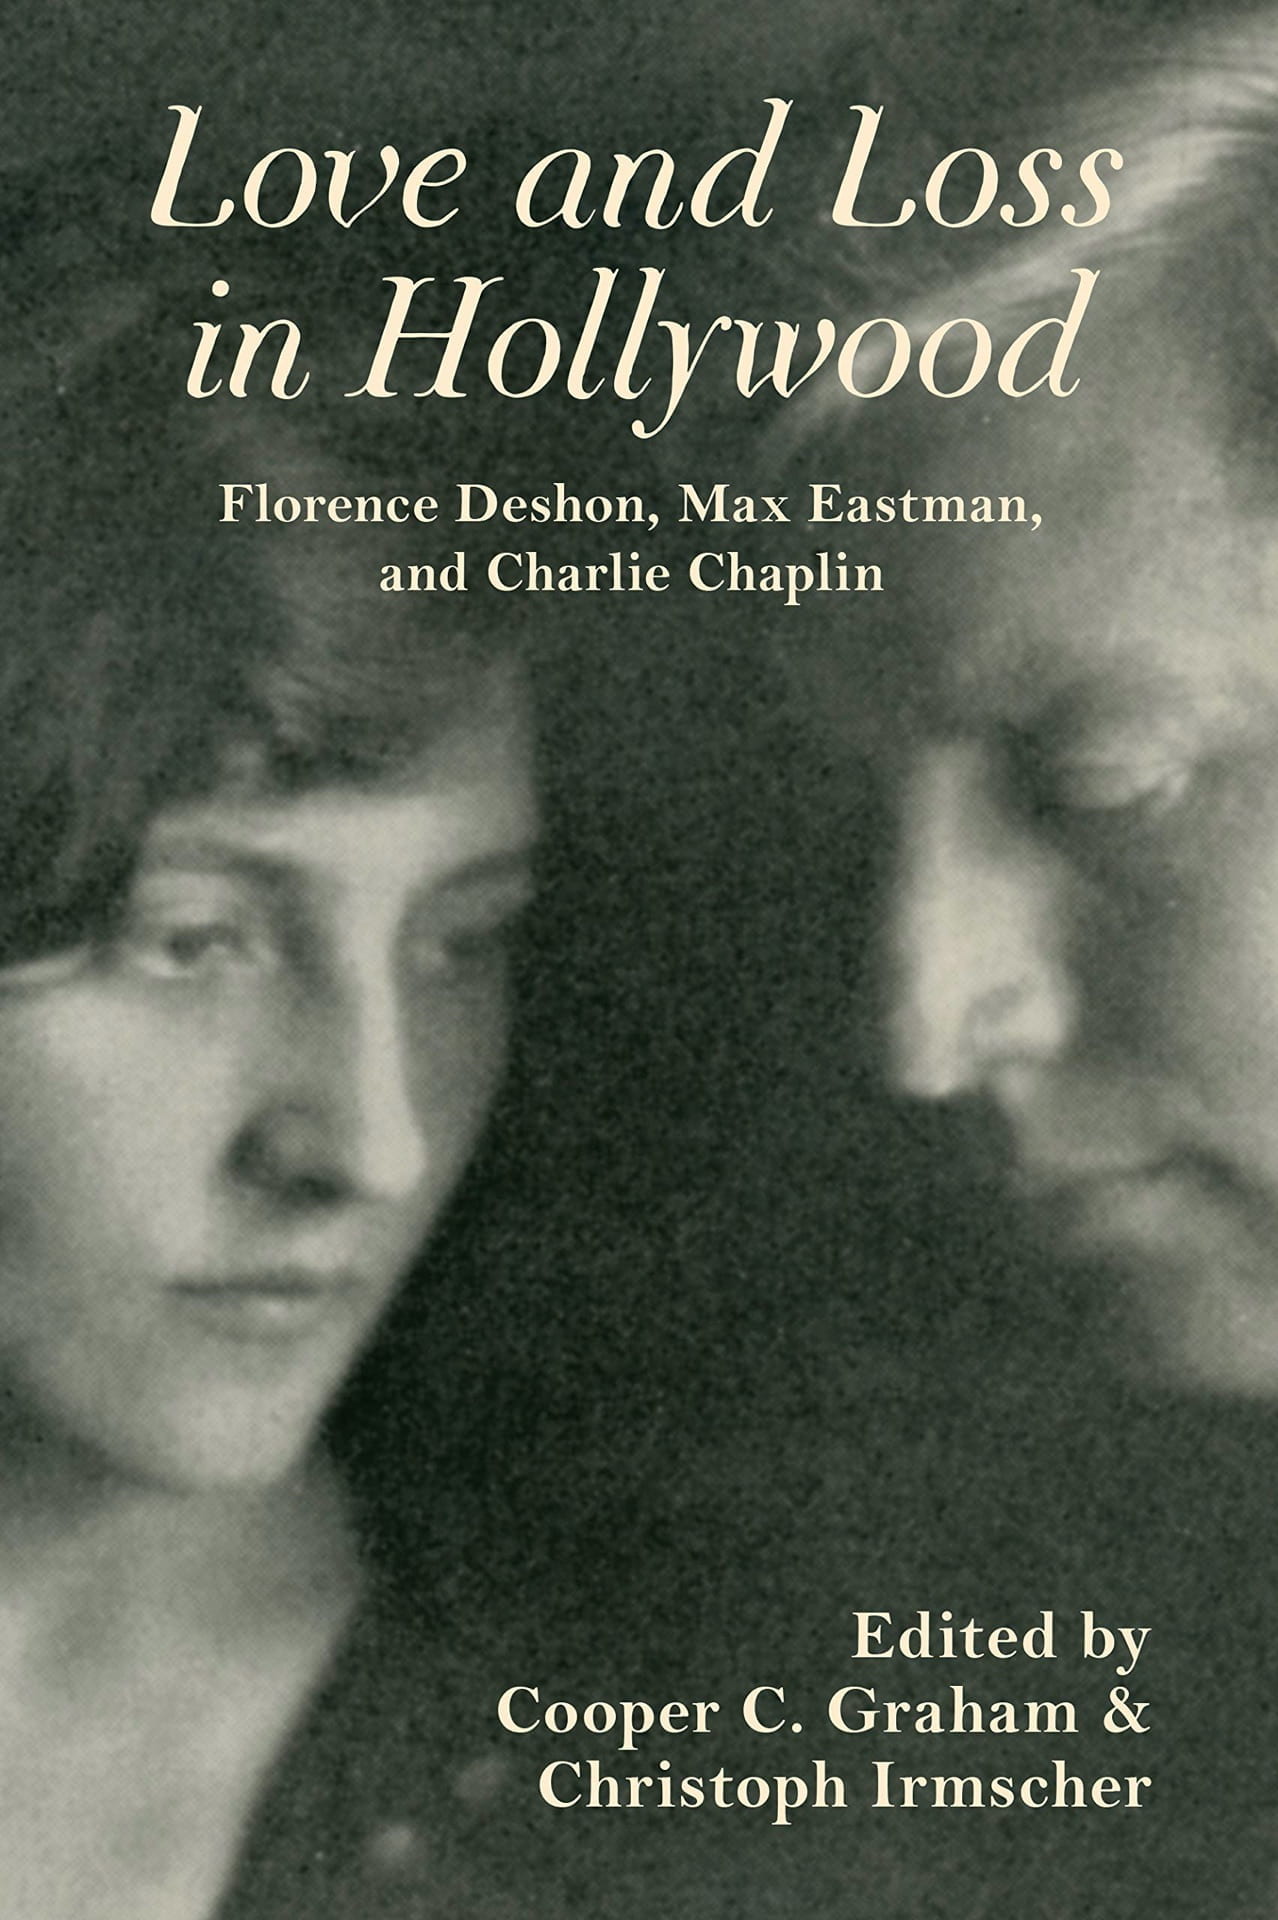 Cover for Love and Loss in Hollywood edited by Cooper C. Graham and Christoph Irmscher. (Photograph by Margarete Mather, courtesy of The Max and Yvette Eastman Estate)